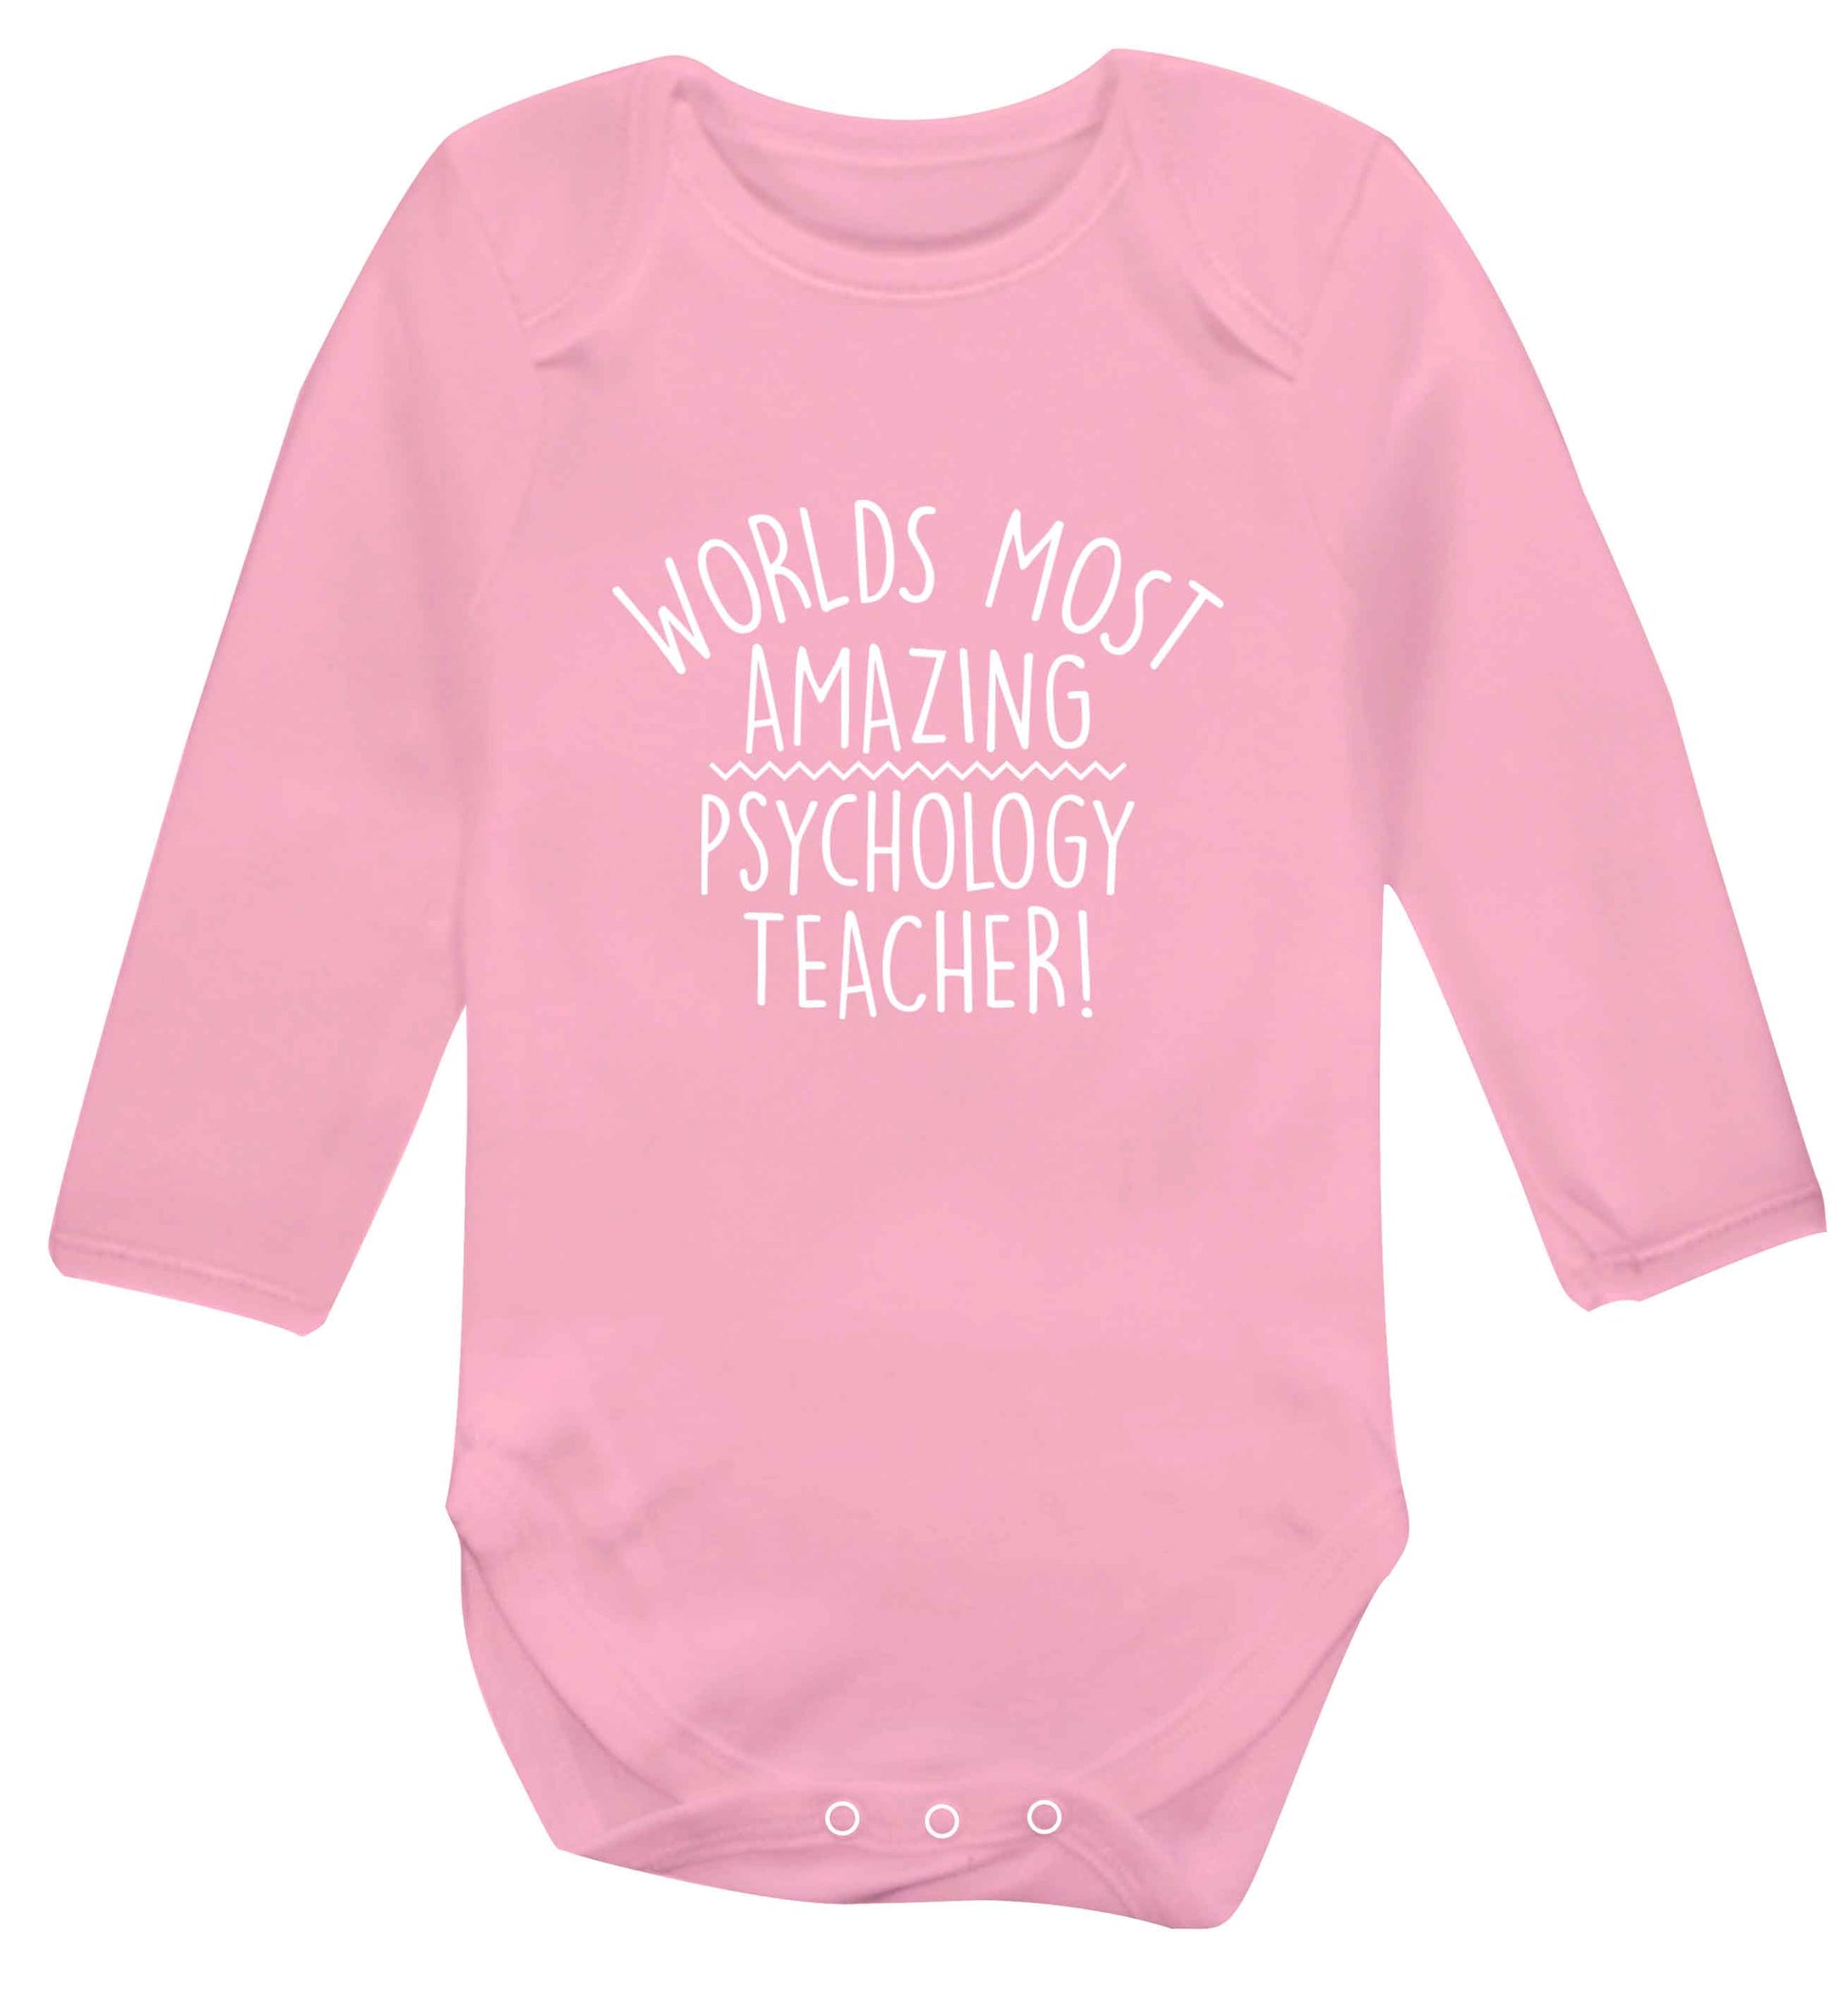 Worlds most amazing psychology teacher baby vest long sleeved pale pink 6-12 months